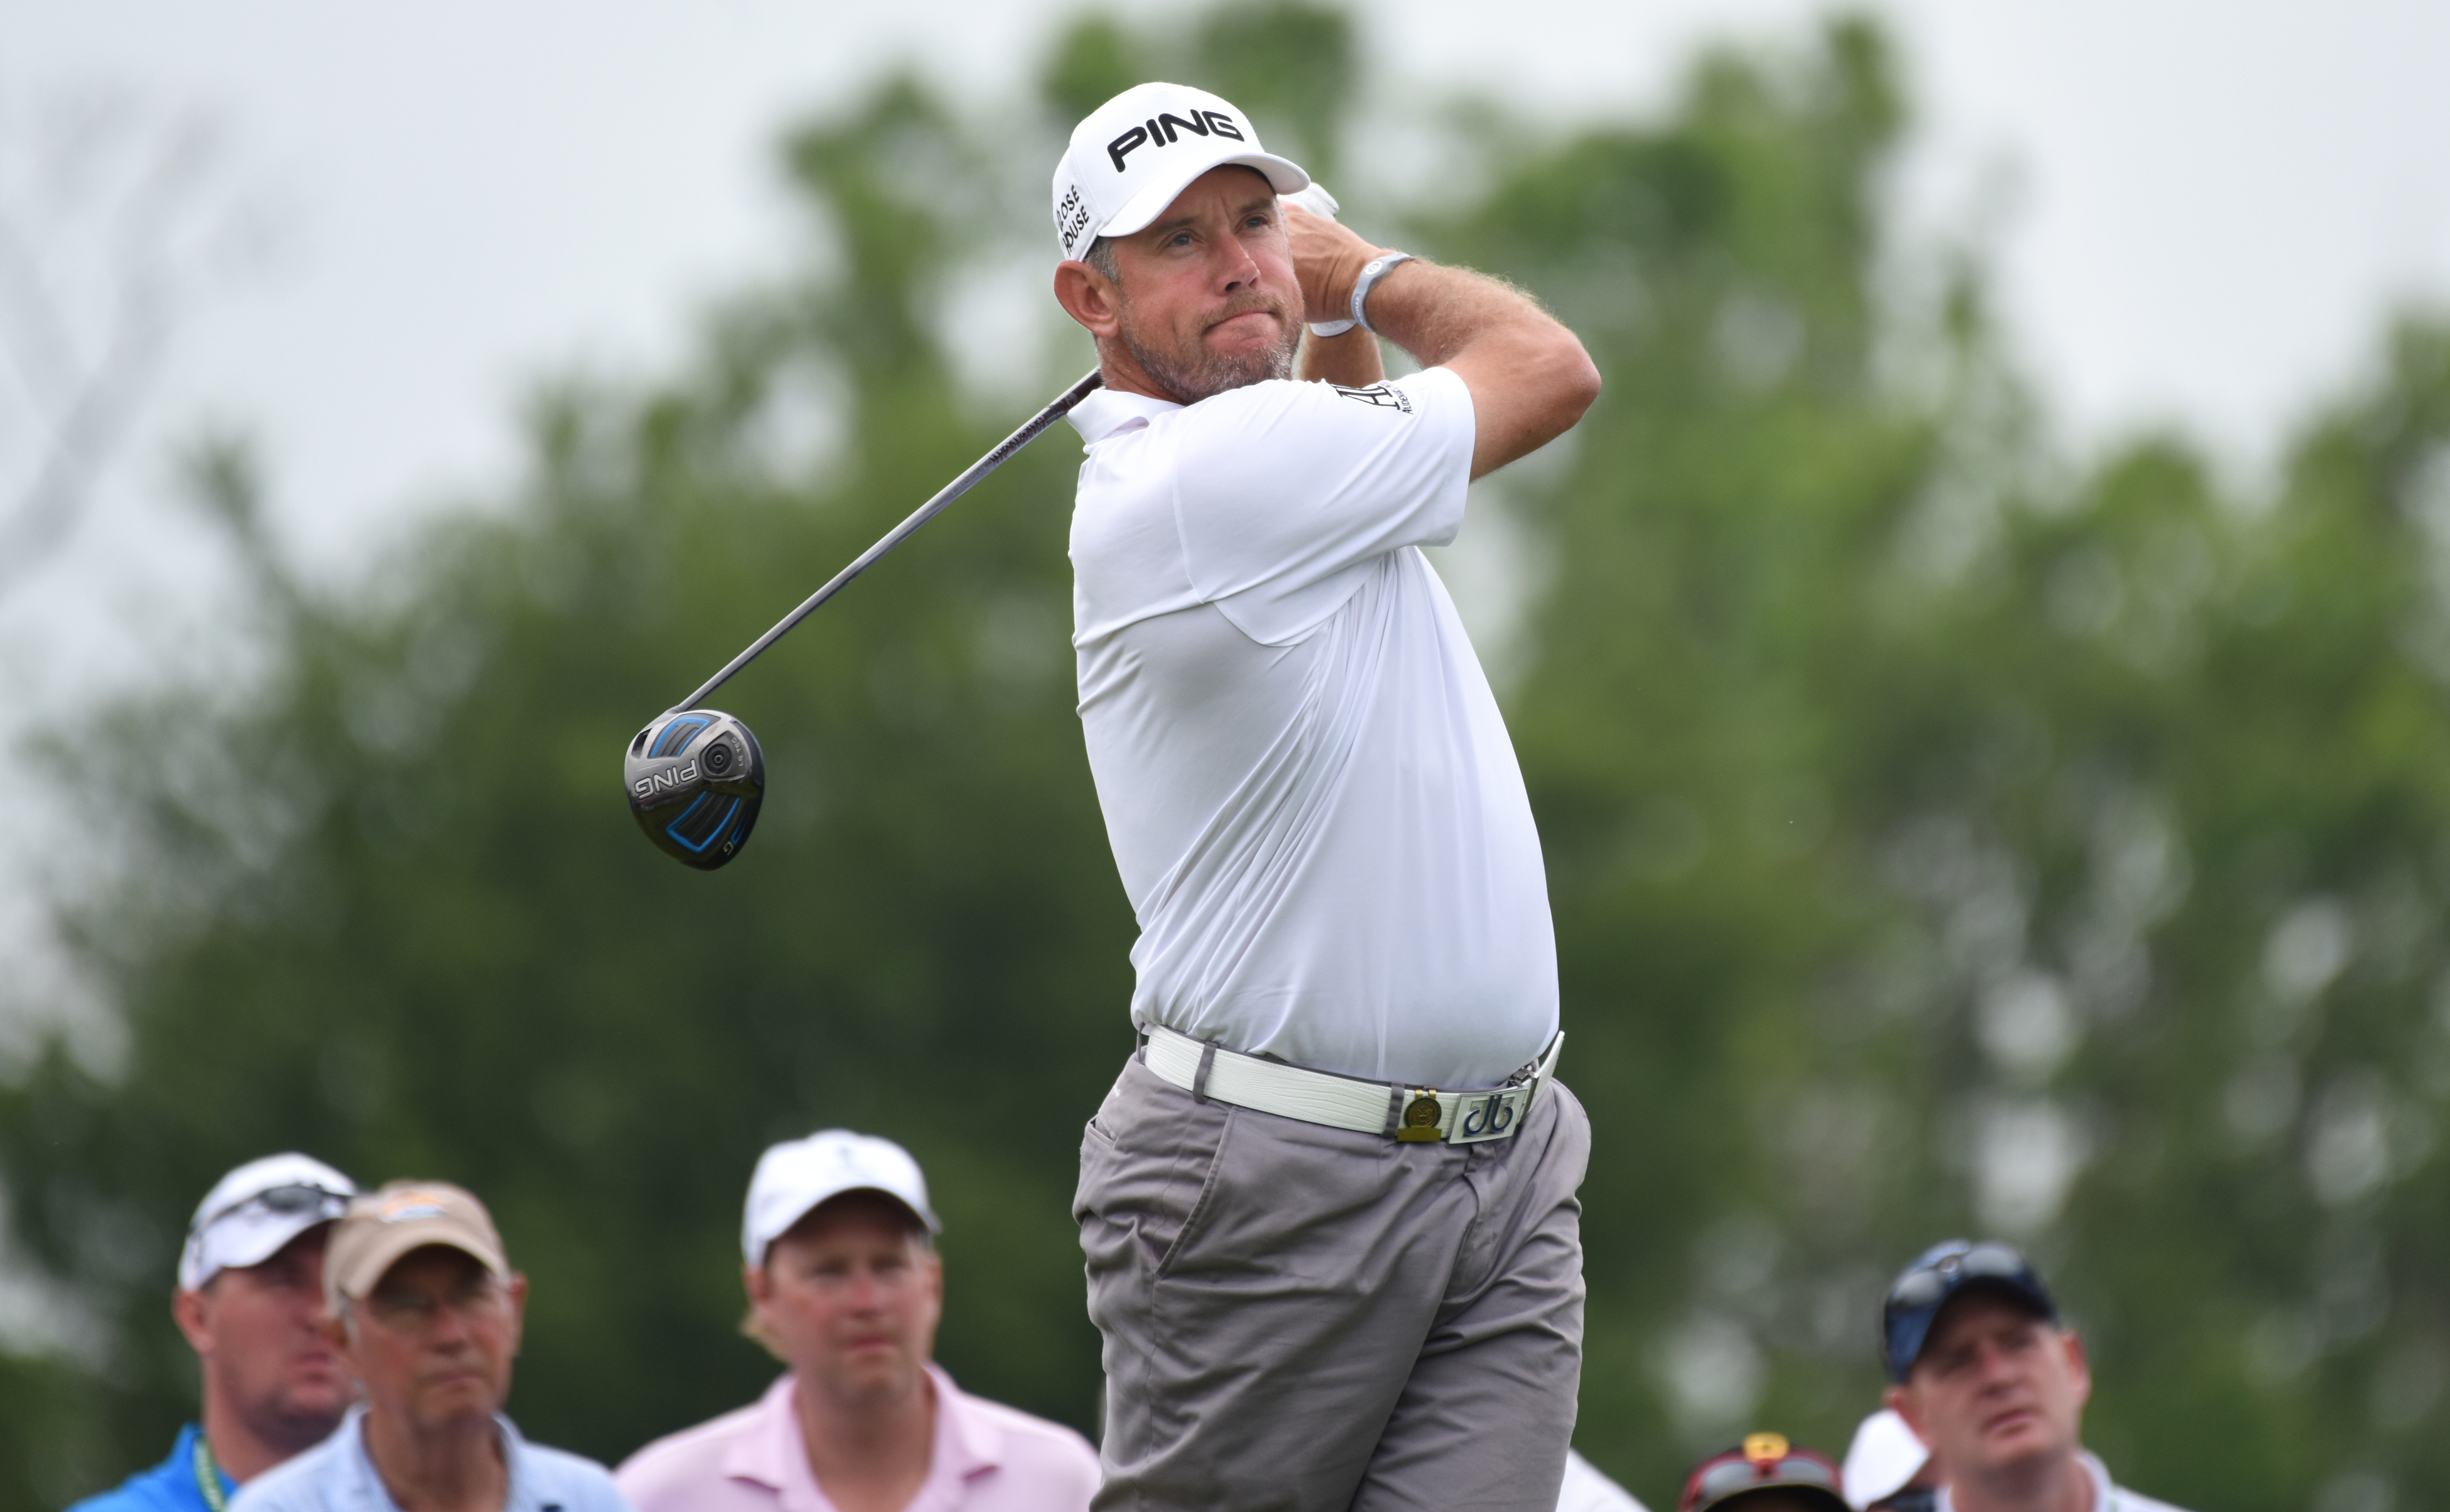 Lee Westwood is still looking for his first major. (Steve Mellon/Post-Gazette)